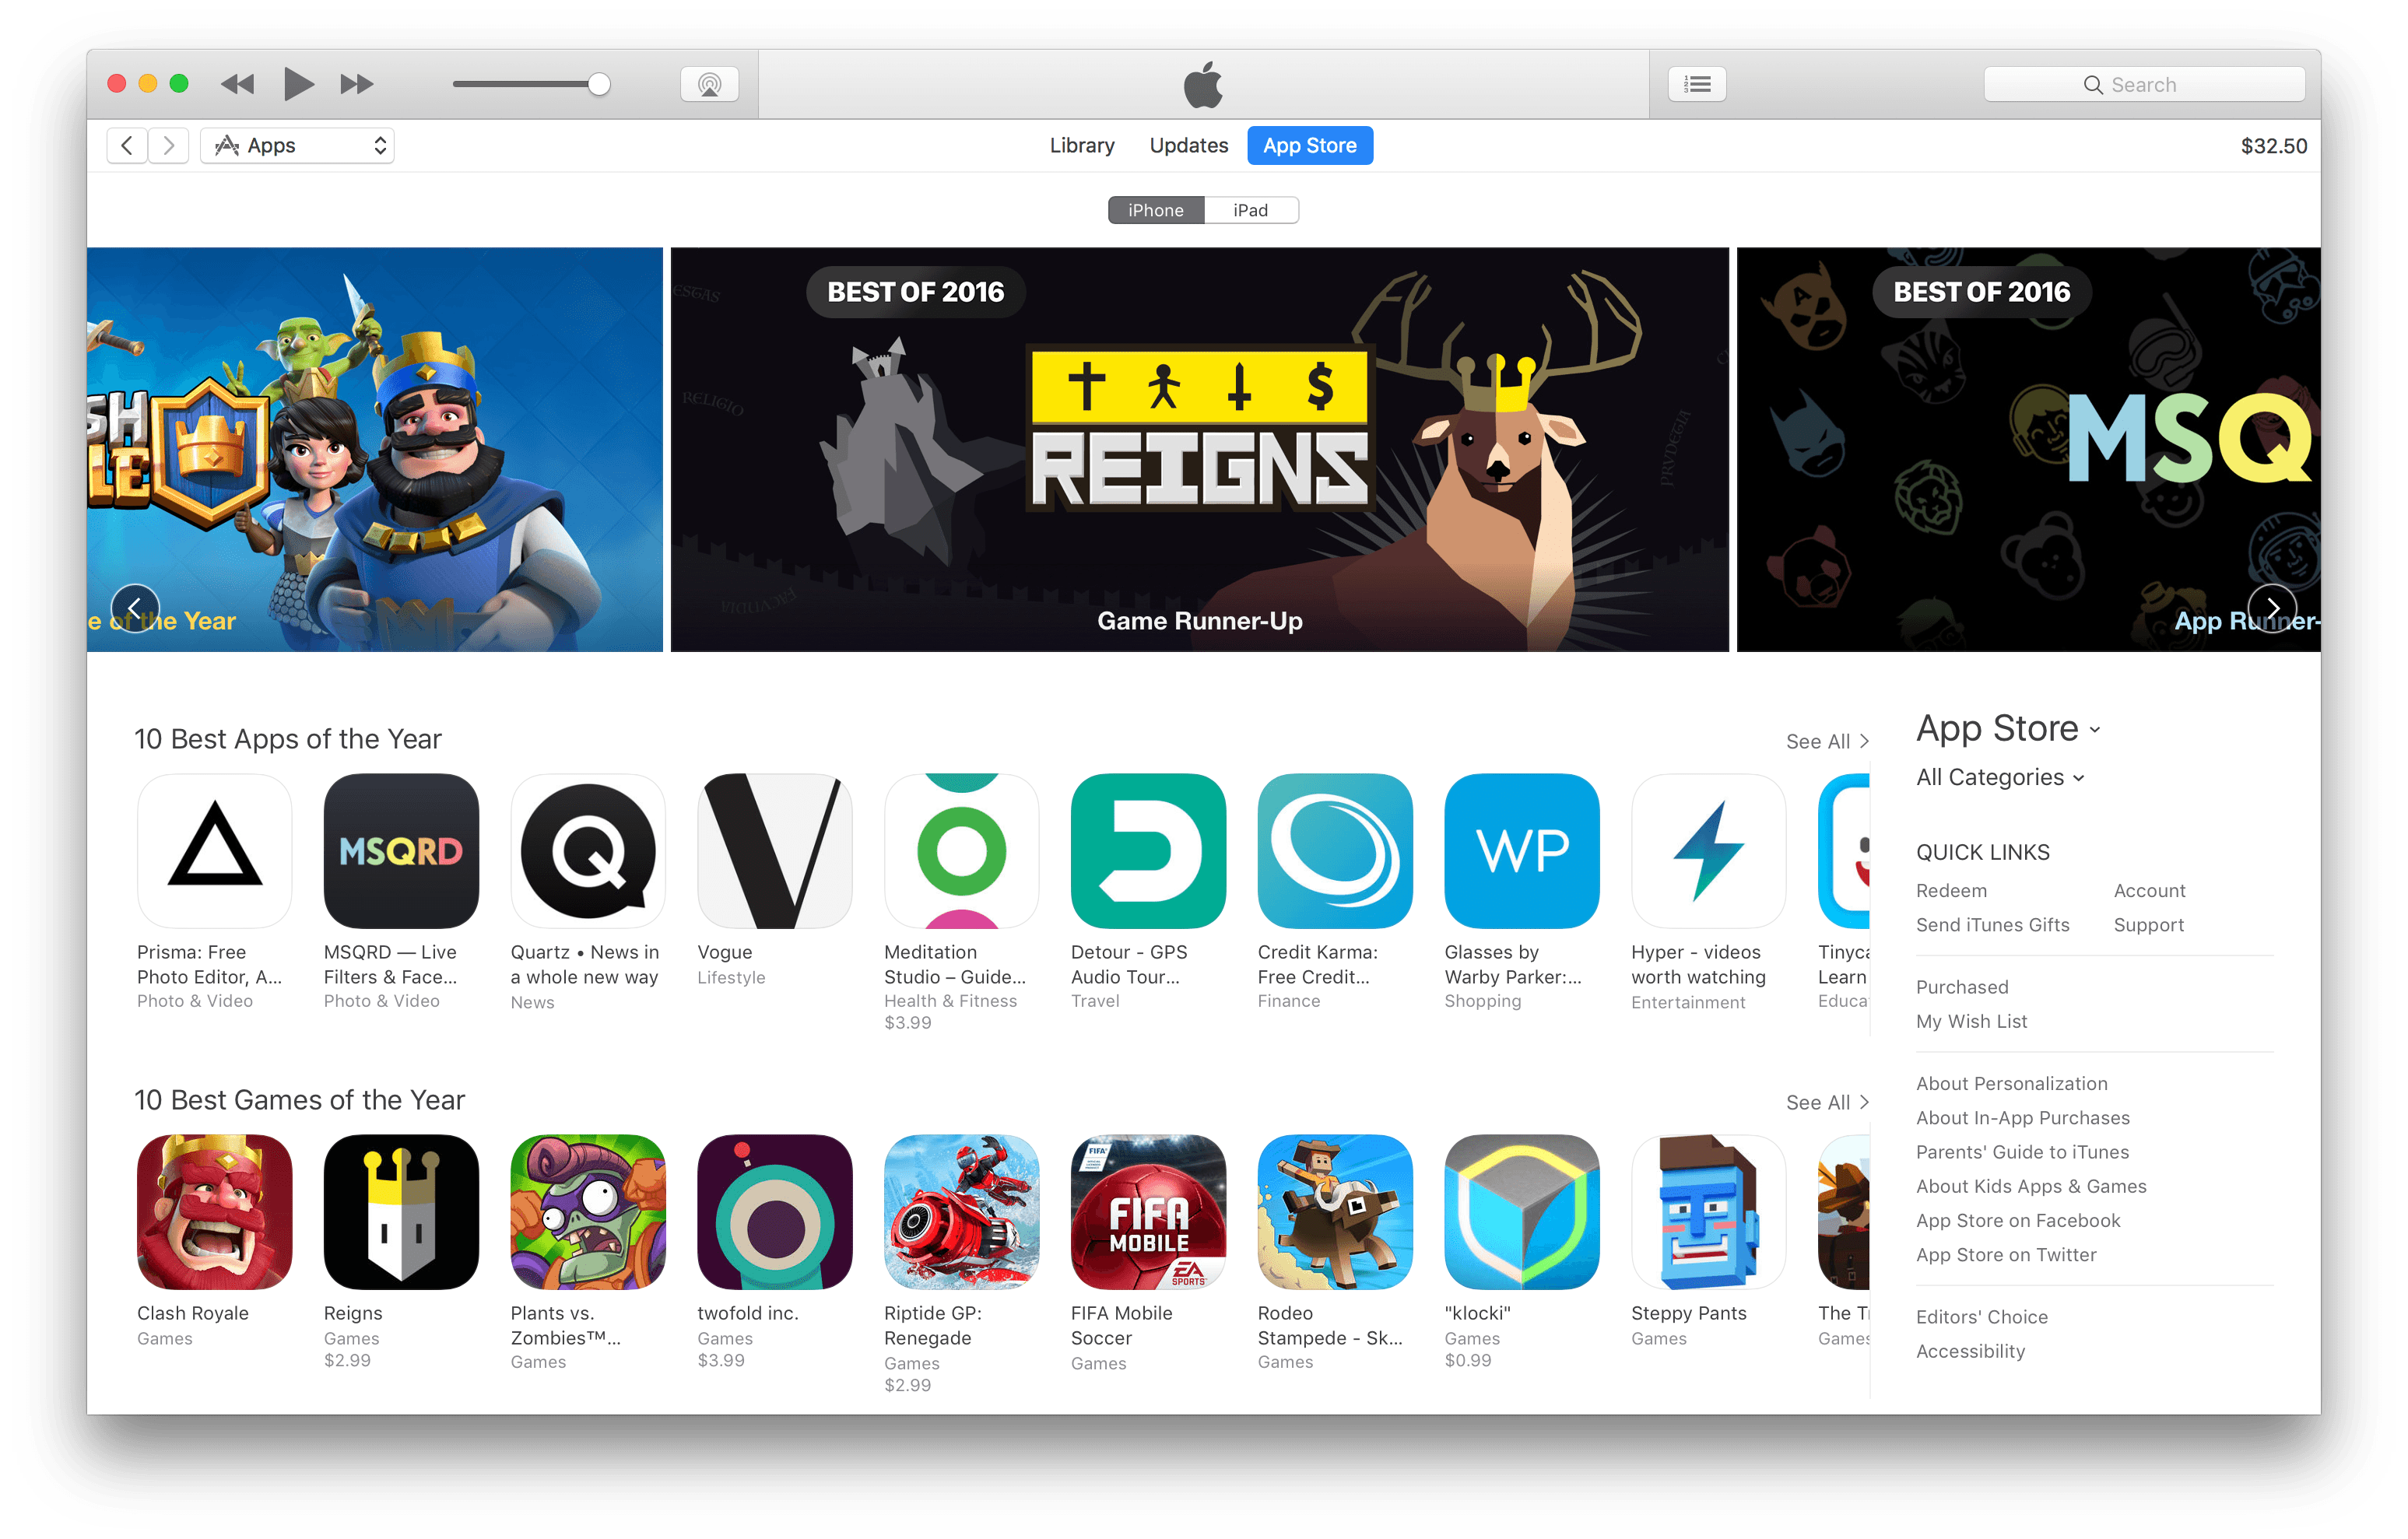 iPad App Store Logo - Apple Publishes Best of 2016 App Store Lists